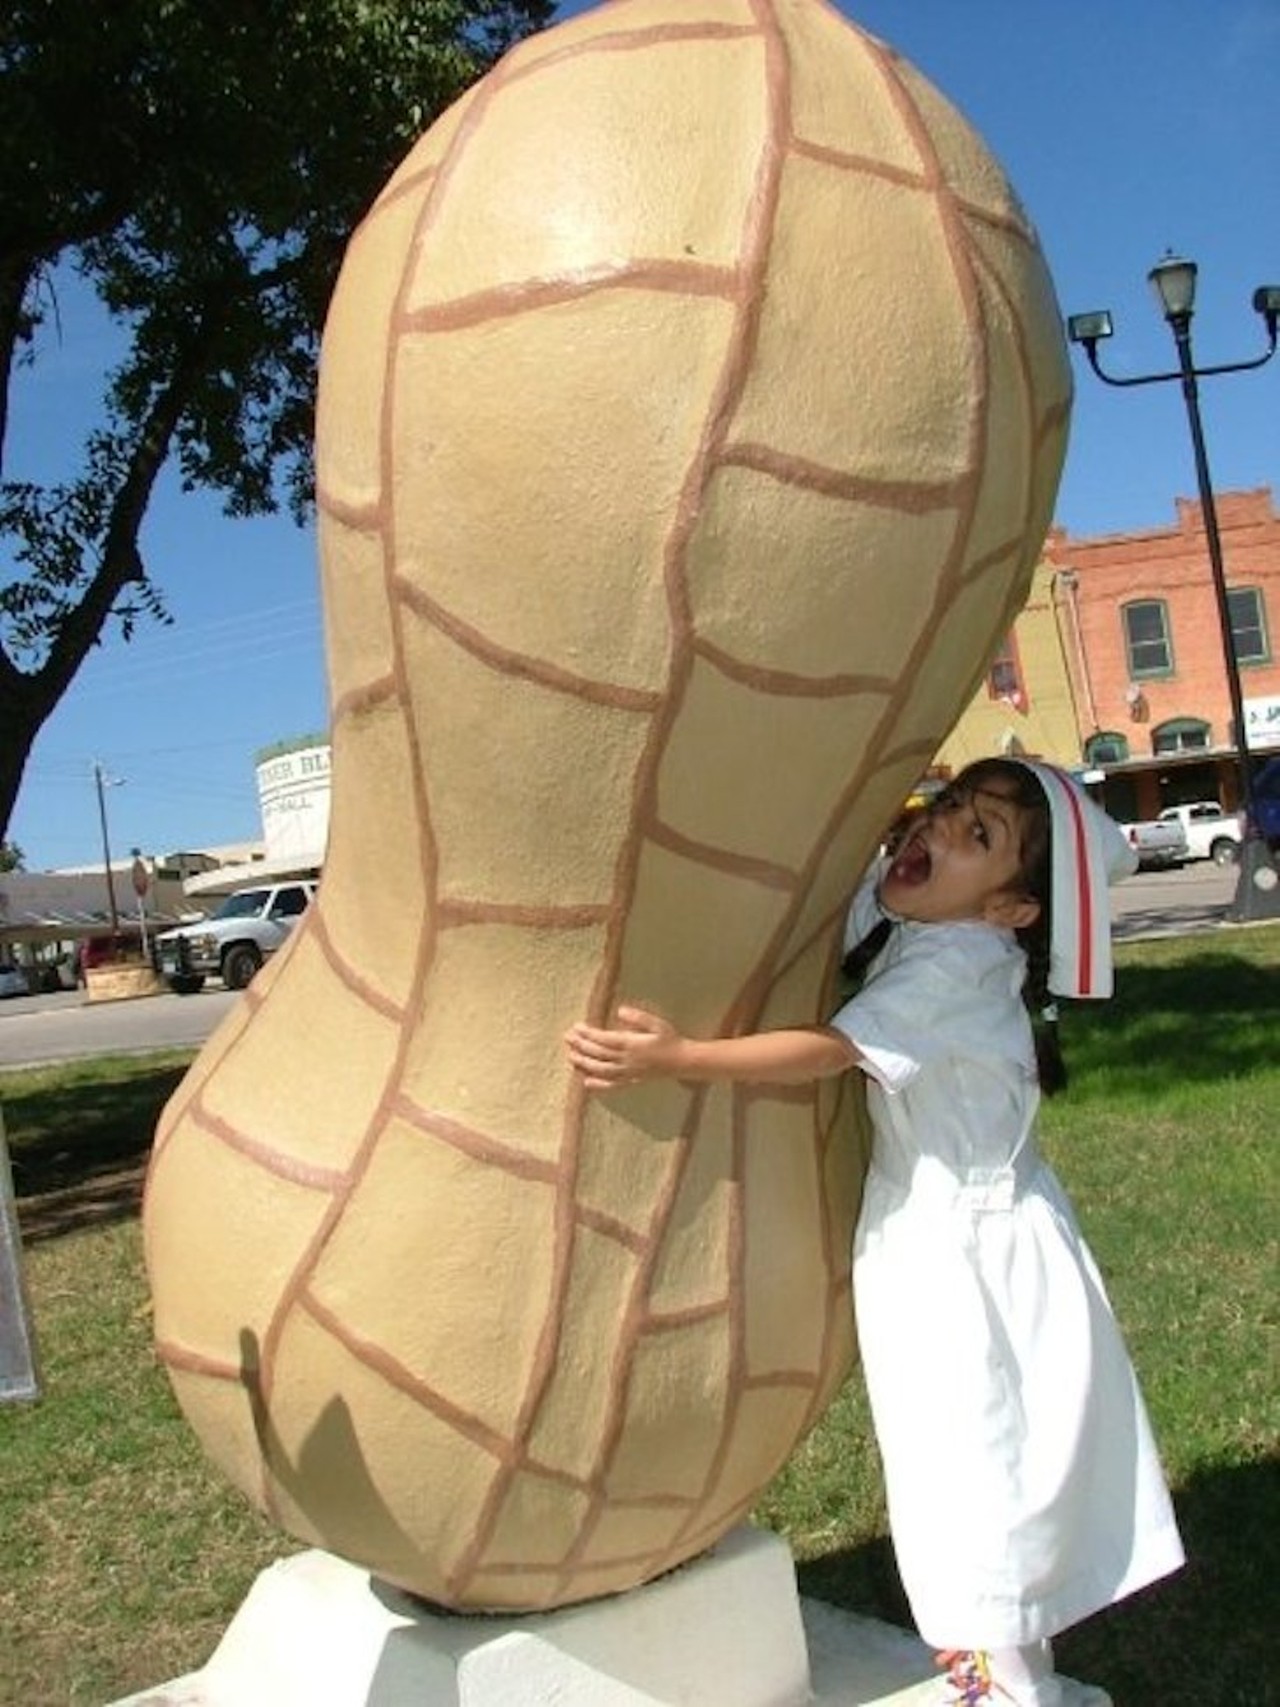 Big Peanut for The Peanut King
1420 3rd St.
Outside of the Wilson County courthouse in Floresville, Texas &#151; approximately forty-five minutes from San Anto &#151;  is one of the oldest big civic peanuts in America. This particular peanut honors Joe T. Sheehy, "The Peanut King," who experimented with peanut farming and introduced peanuts as a viable crop to Wilson County in 1916. 
Photo via Facebook (Rita Hernandez)